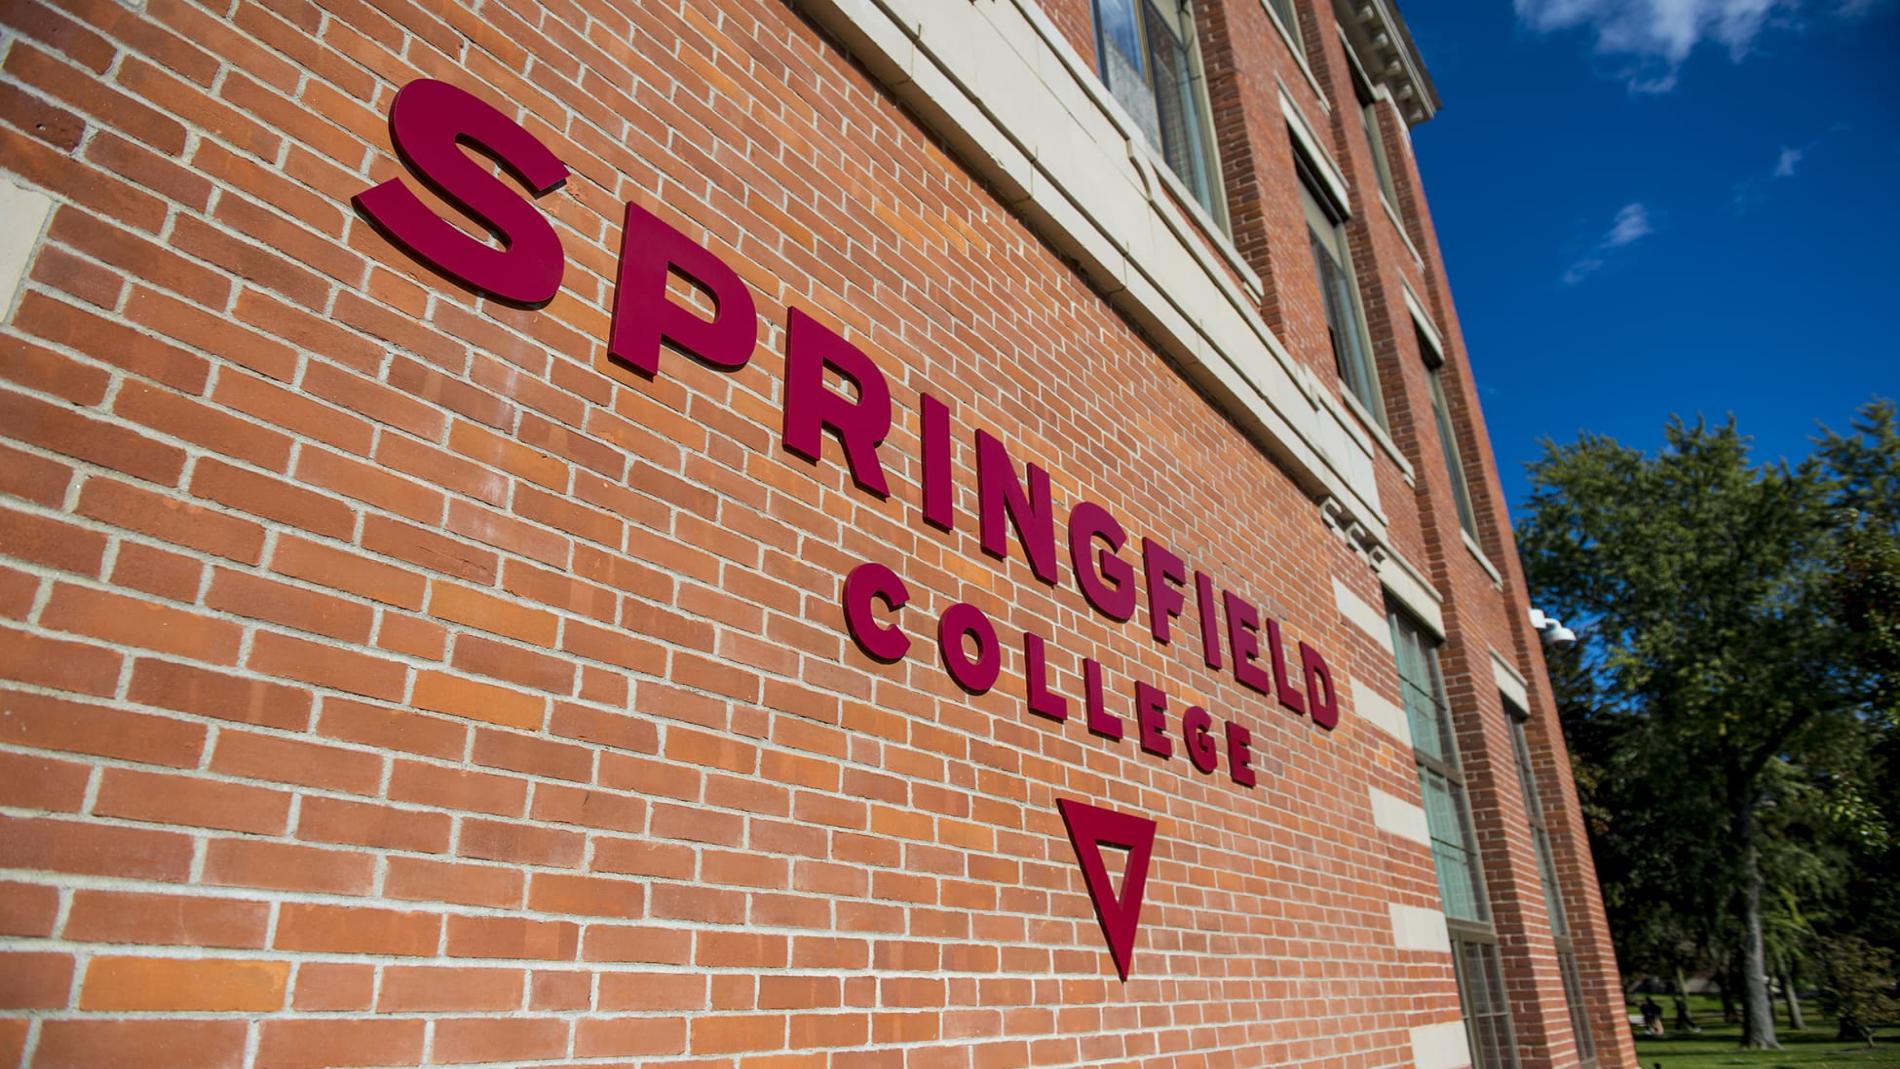 The campus of Springfield College